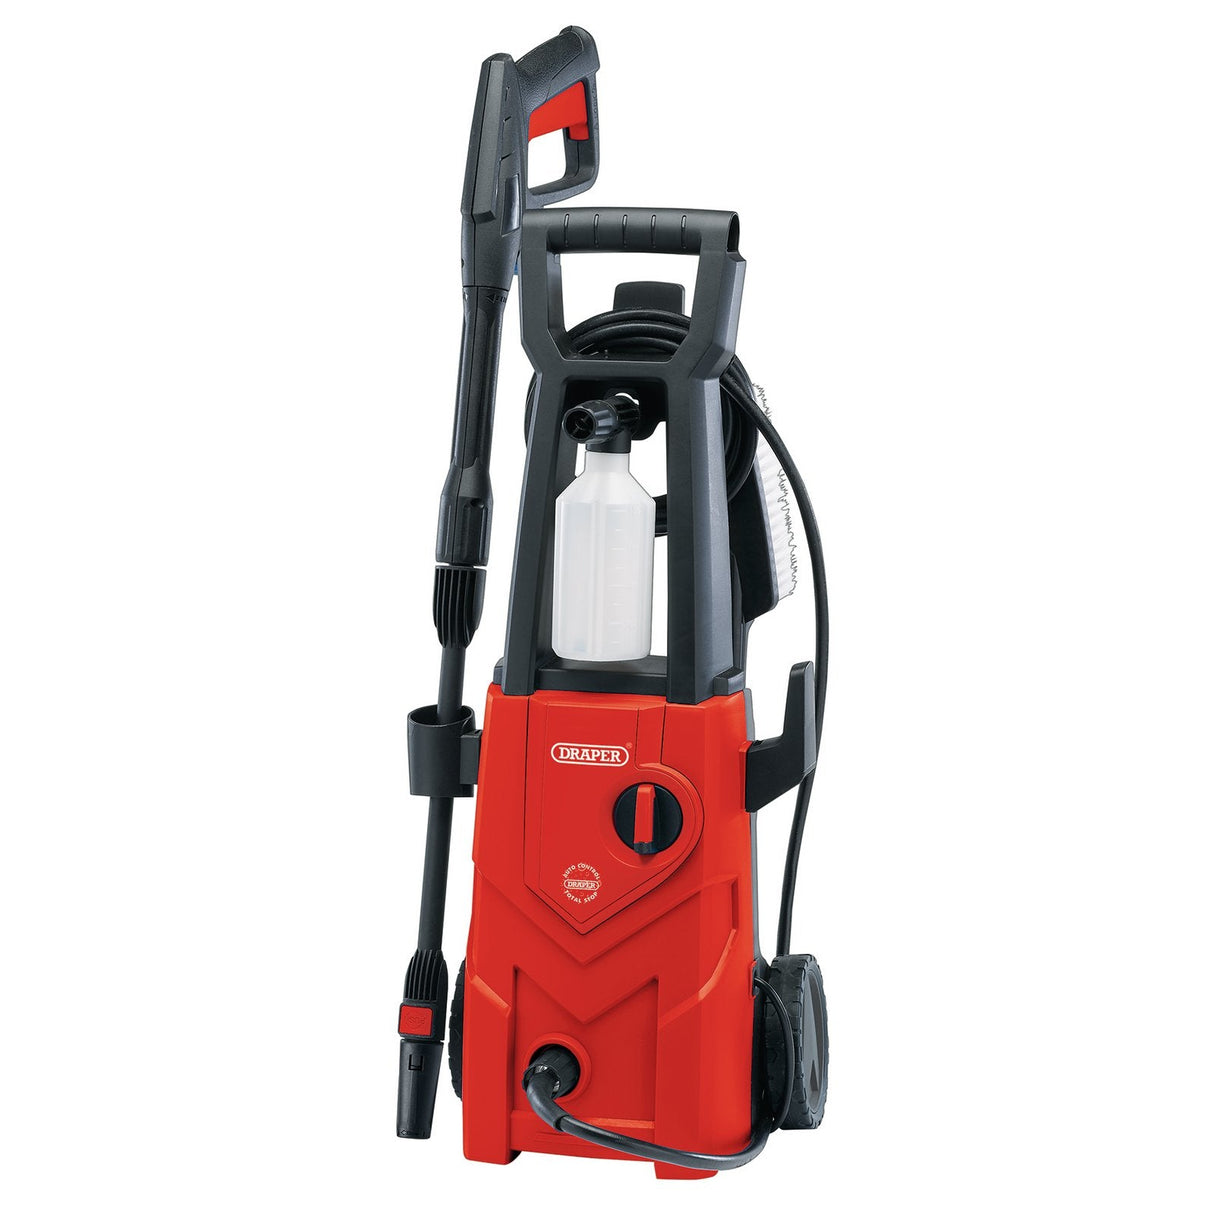 Draper 230V Pressure Washer, 1600W, 135Bar, Red - PW1600/90D/RED - Farming Parts